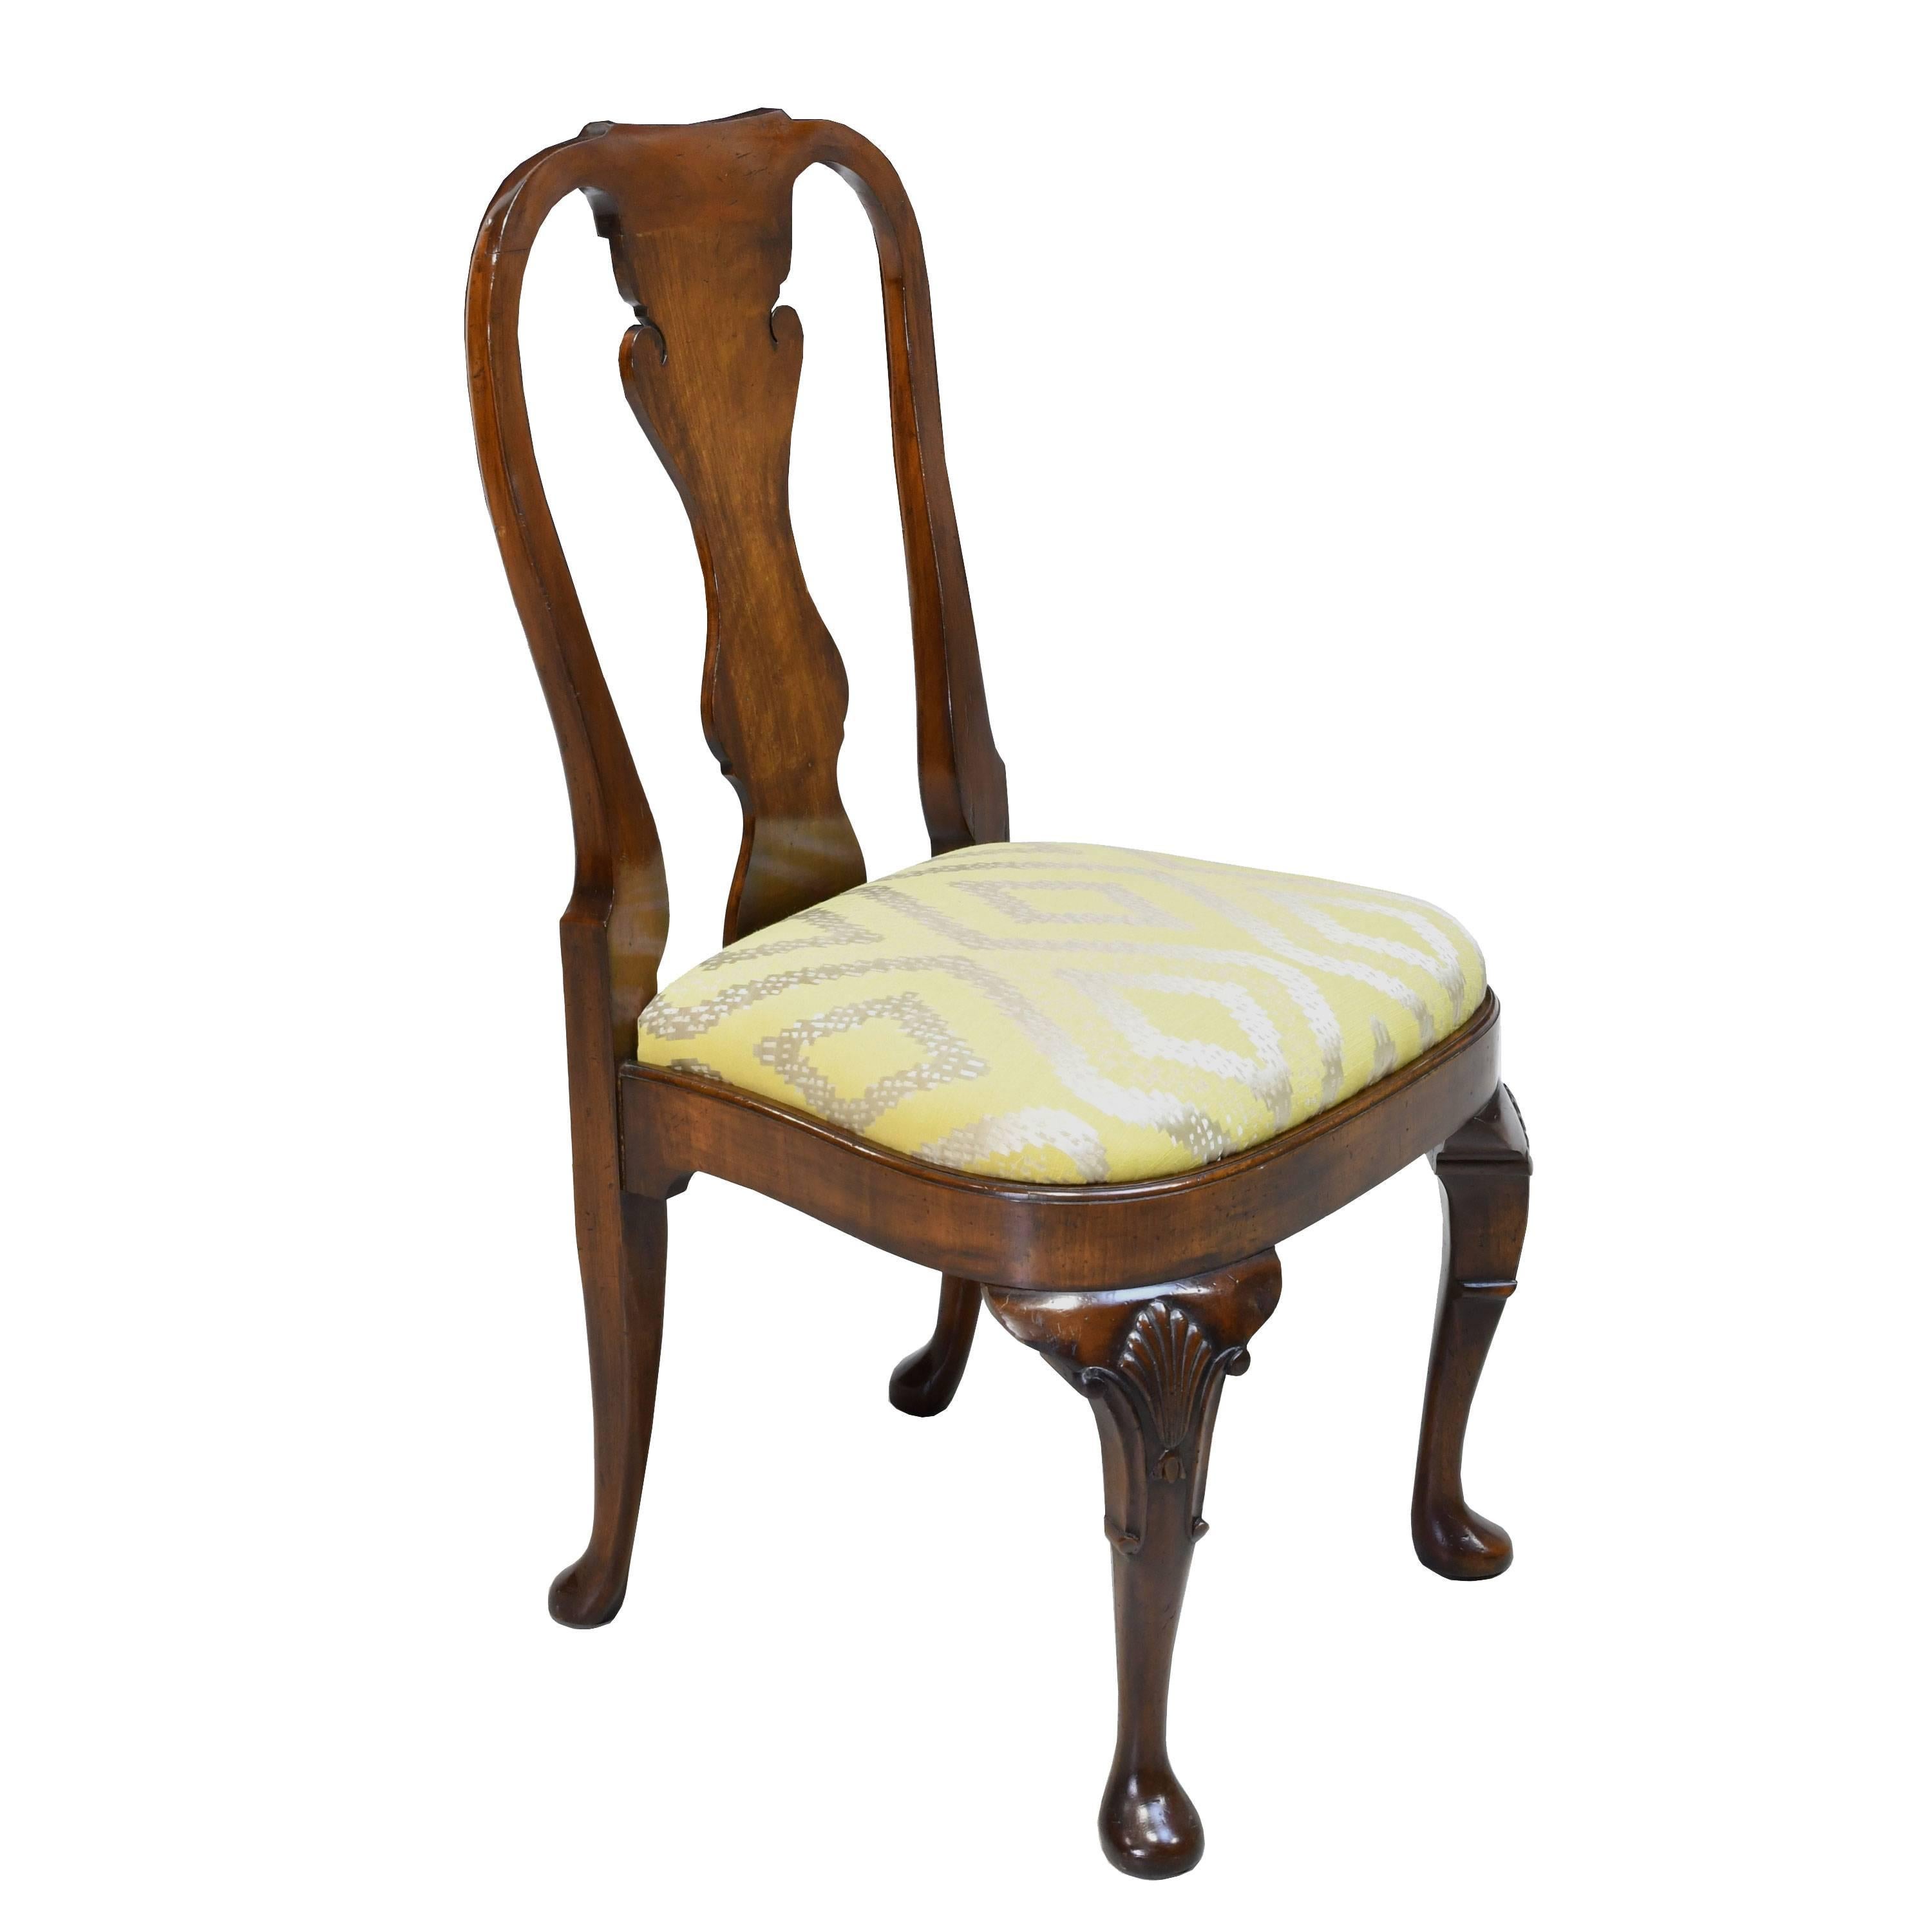 A set of eight very well-crafted English or American Queen Anne-style dining chairs in mahogany with fiddle-back, rounded upholstered slip seat, and cabriole legs with carved knees and padded feet, circa 1880.
Offer wide, comfortable slip seats that